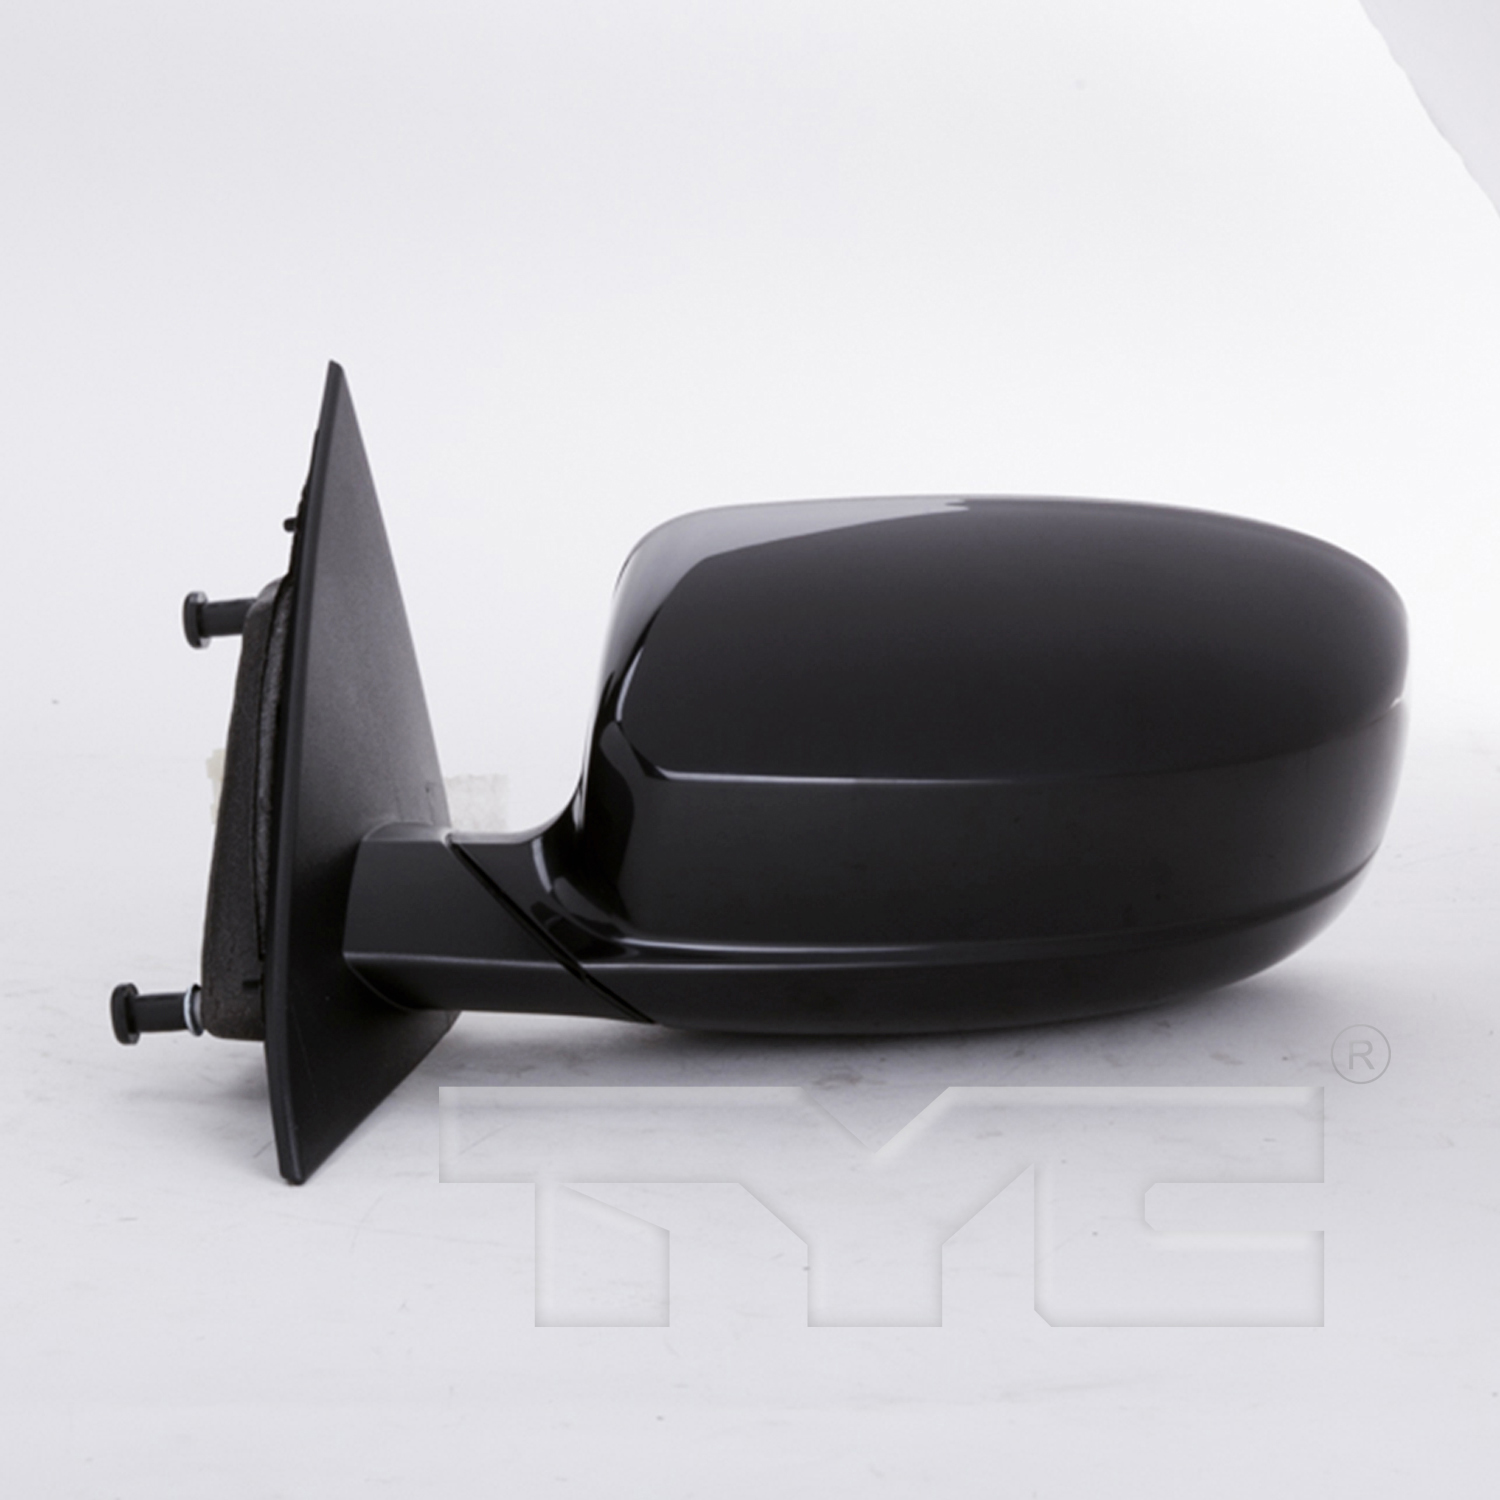 Aftermarket MIRRORS for CHRYSLER - 200, 200,11-11,LT Mirror outside rear view